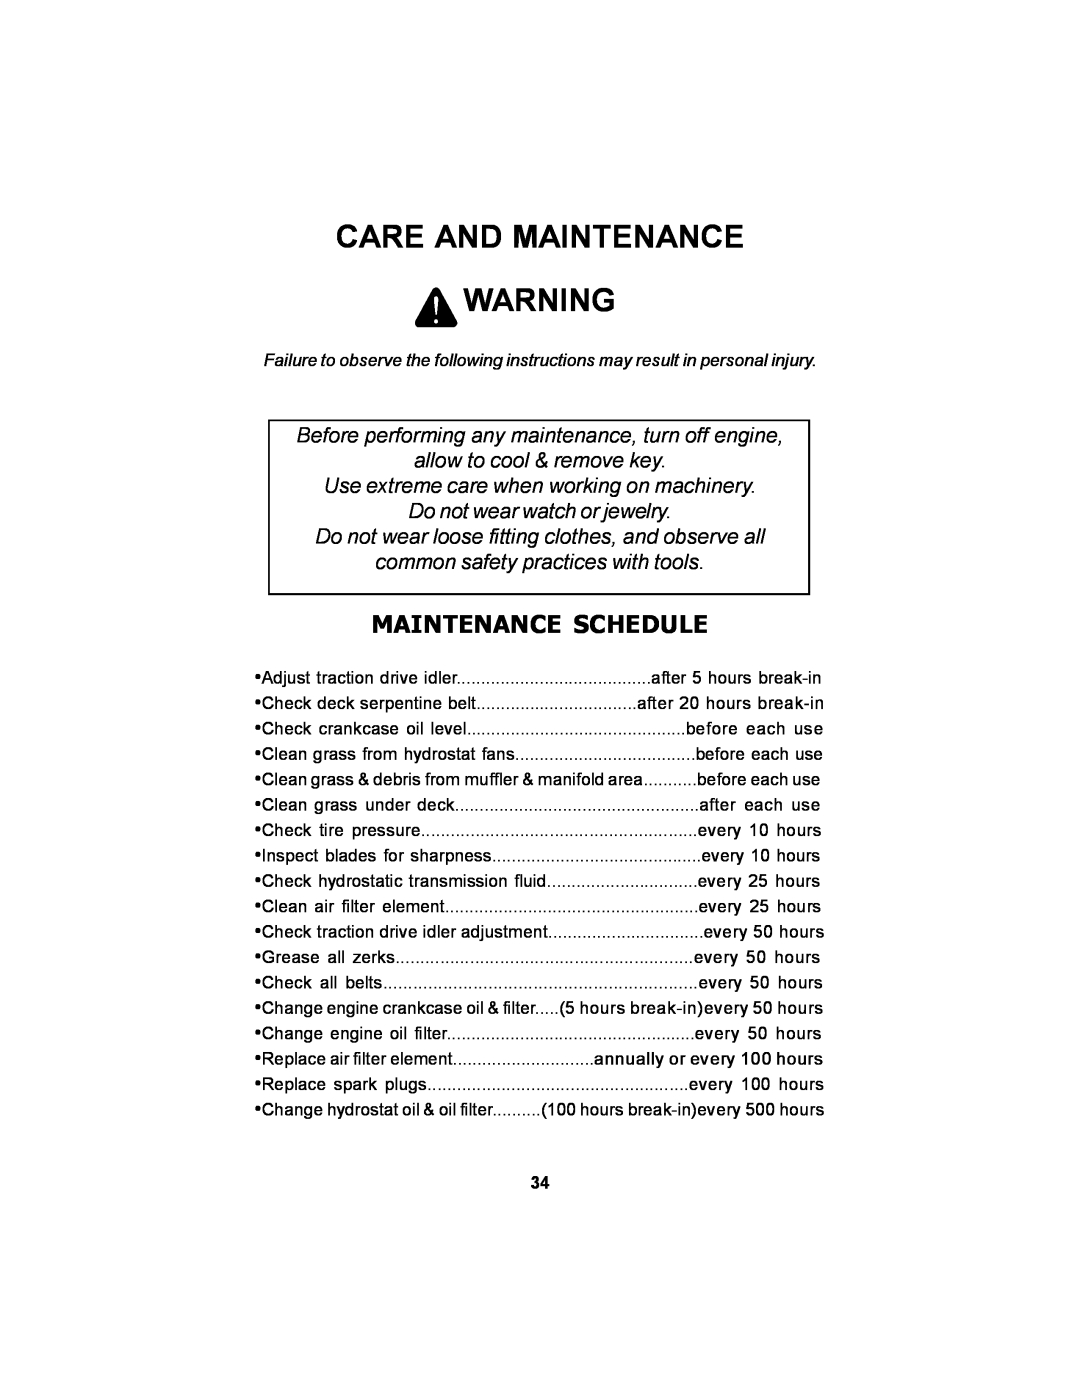 Dixon Black Bear manual Care And Maintenance, Maintenance Schedule, Before performing any maintenance, turn off engine 